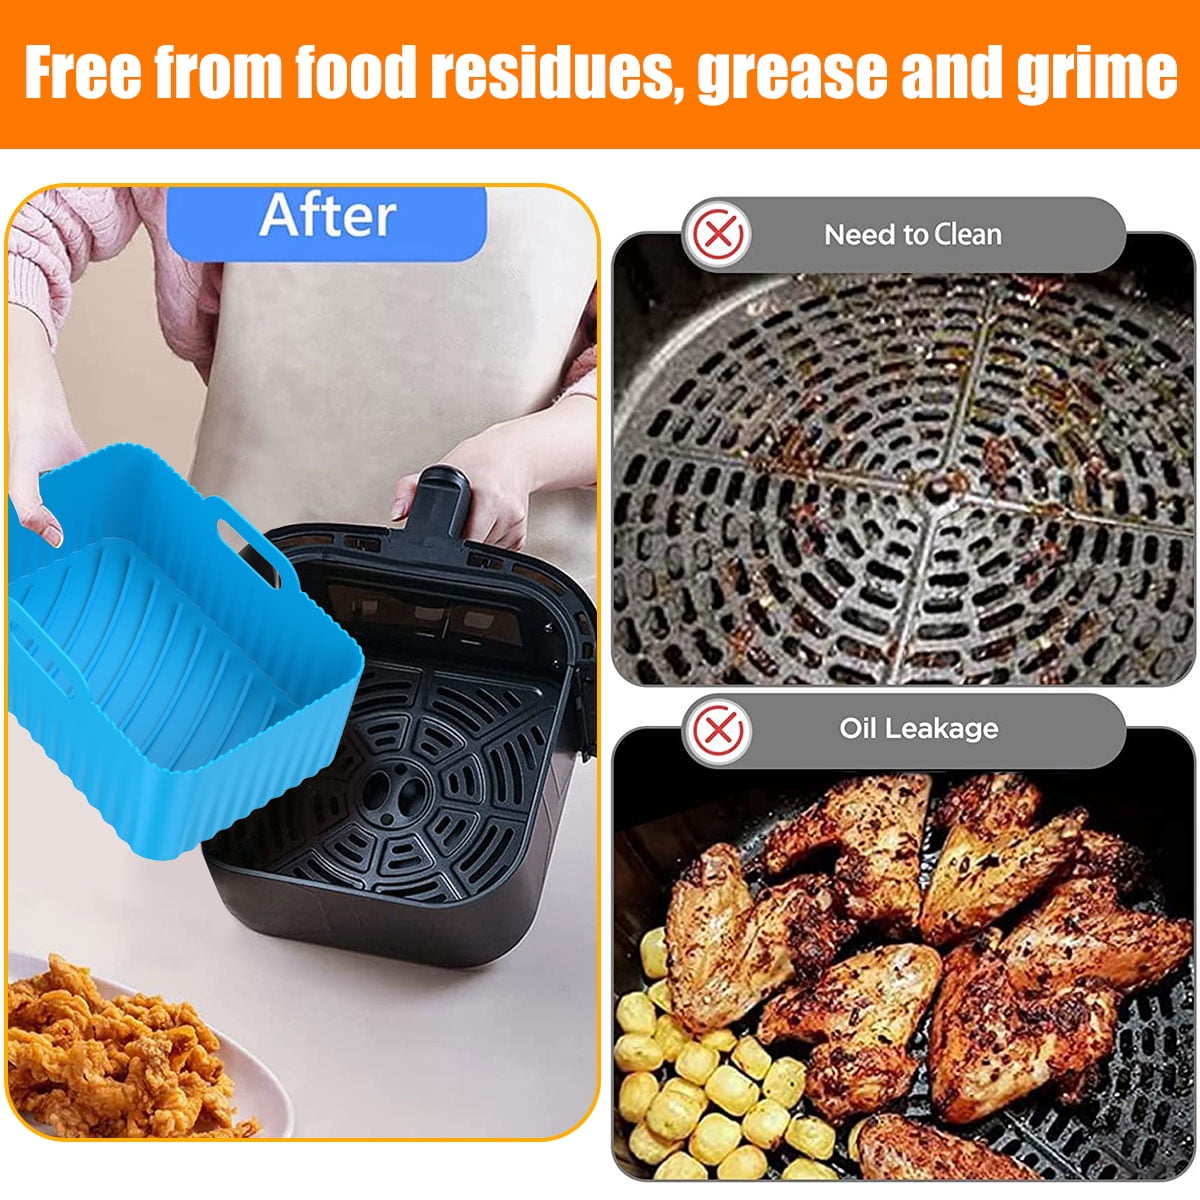 10QT Air Fryer Silicone Liners - 2Pcs Rectangular Airfryer Silicone Pot  Baking Tray for Ninja Dual DZ401/DZ550 Reusable Replacement Basket Insert  with